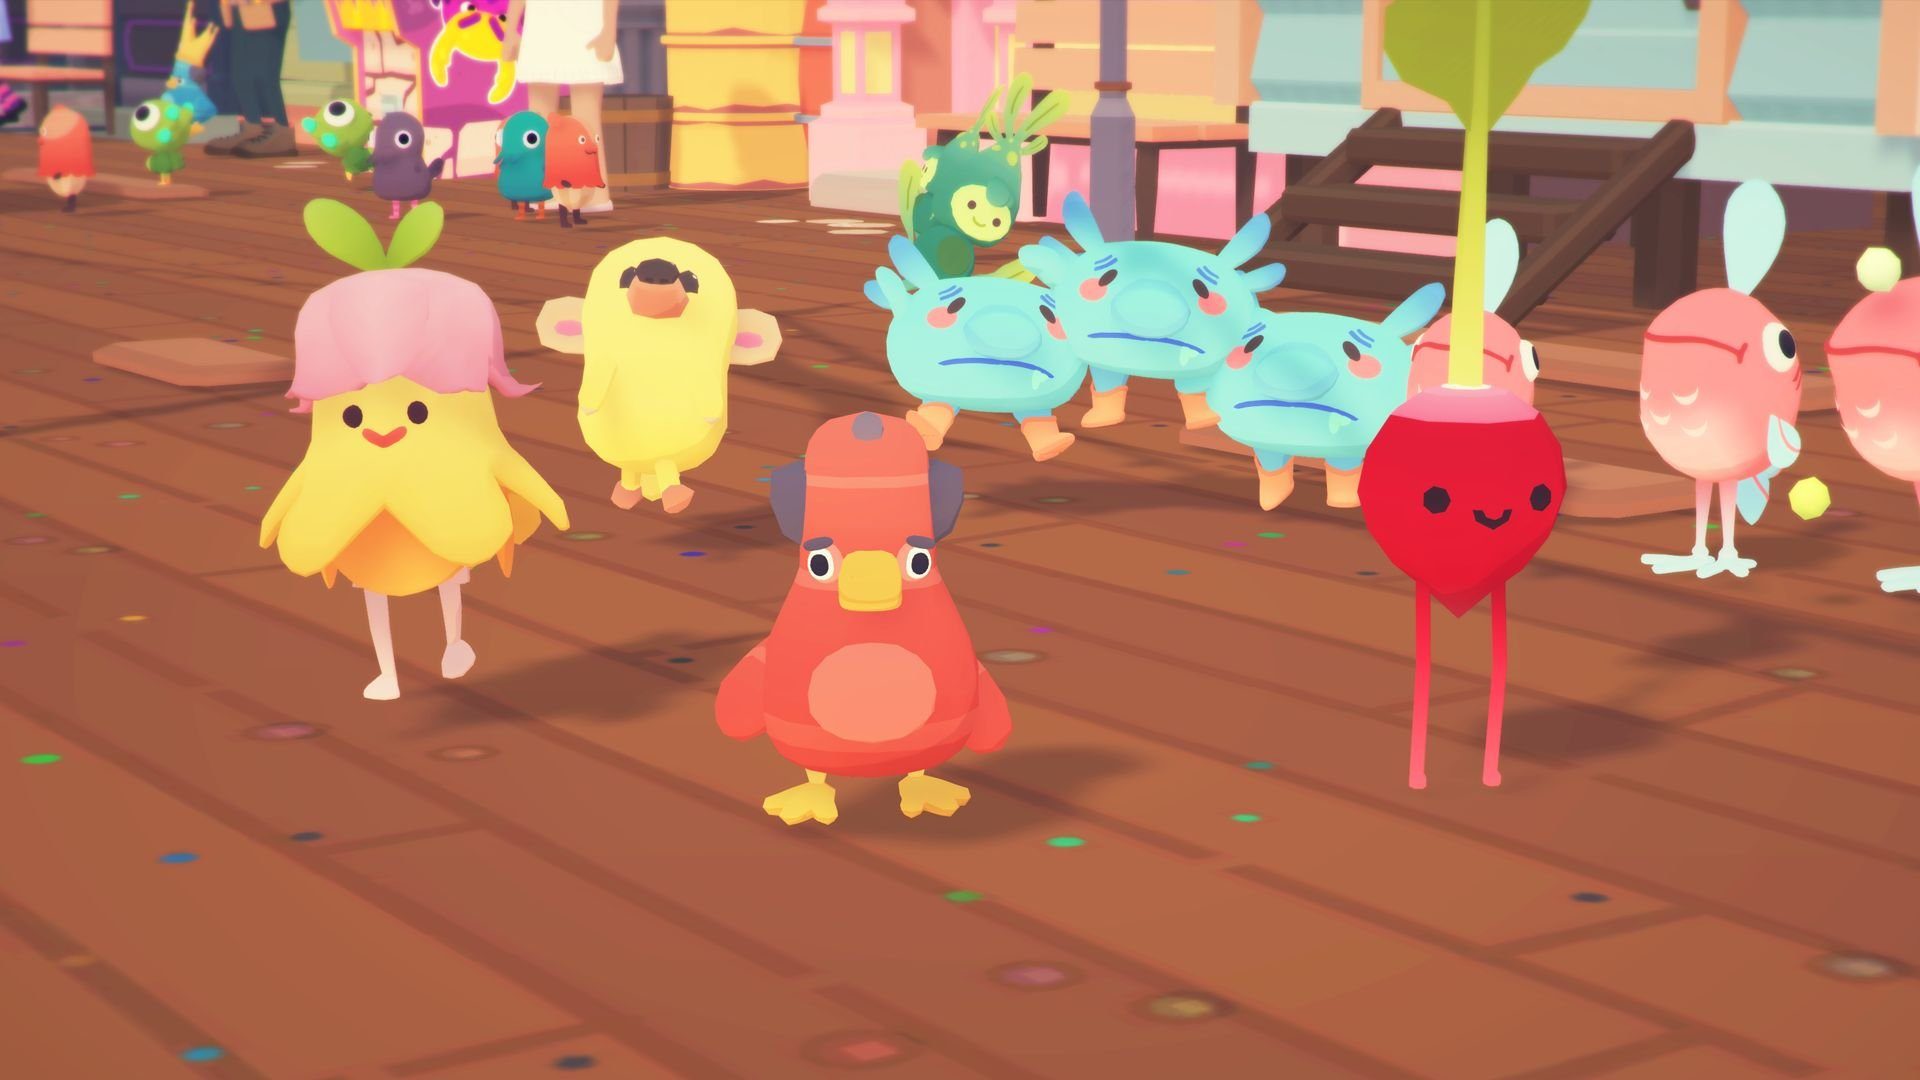 Switch Ooblets Nintendo